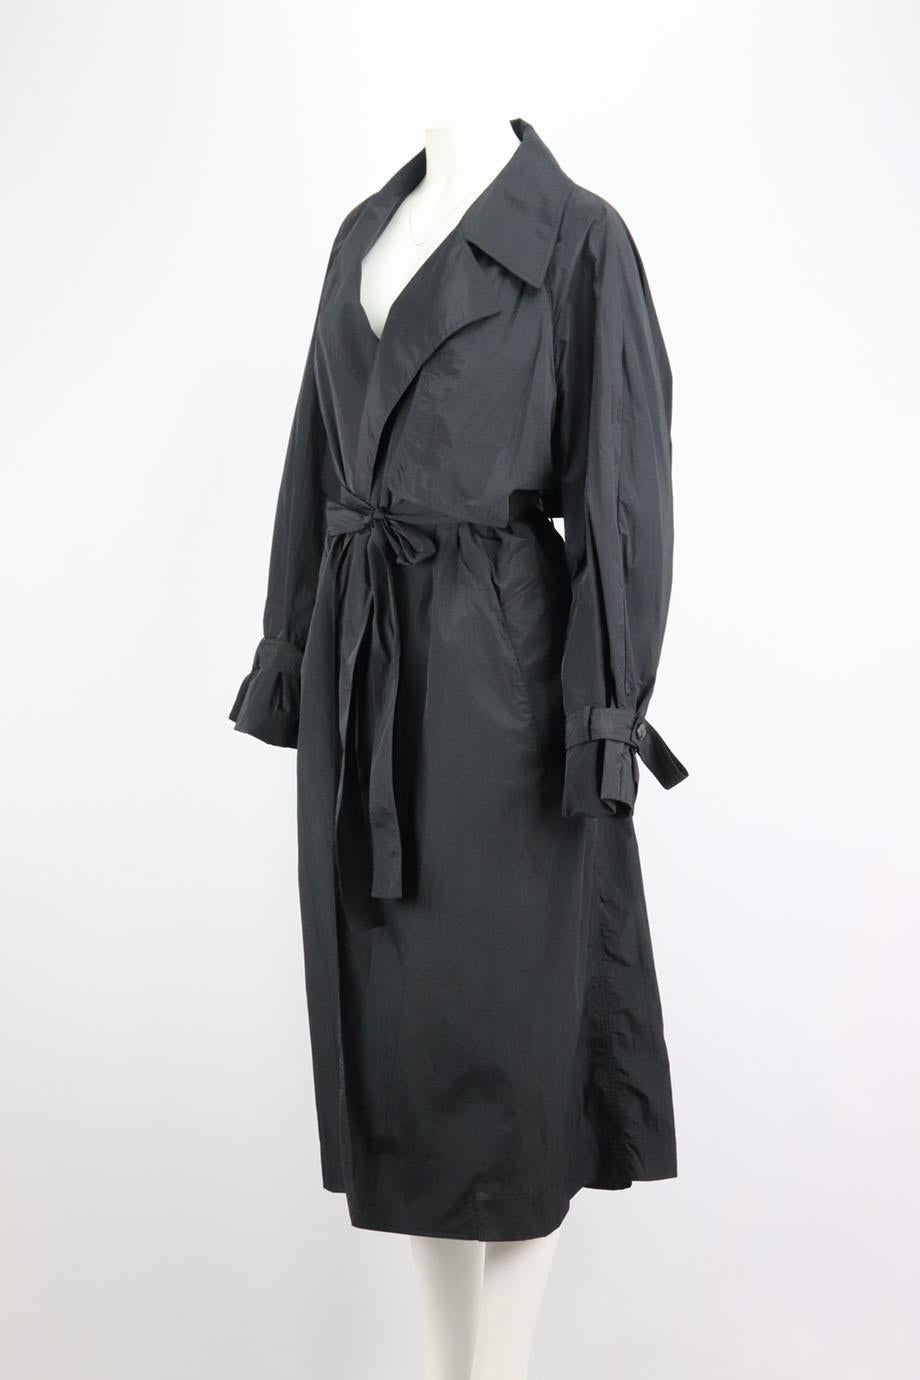 This 'Kareem' trench coat by The Row is made from lightweight shell, so you can wear it year-round, it's cut in a relaxed fit with an oversized storm flap and pockets for your phone, keys and cardholder. Black shell. Belt fastening at front. 100%